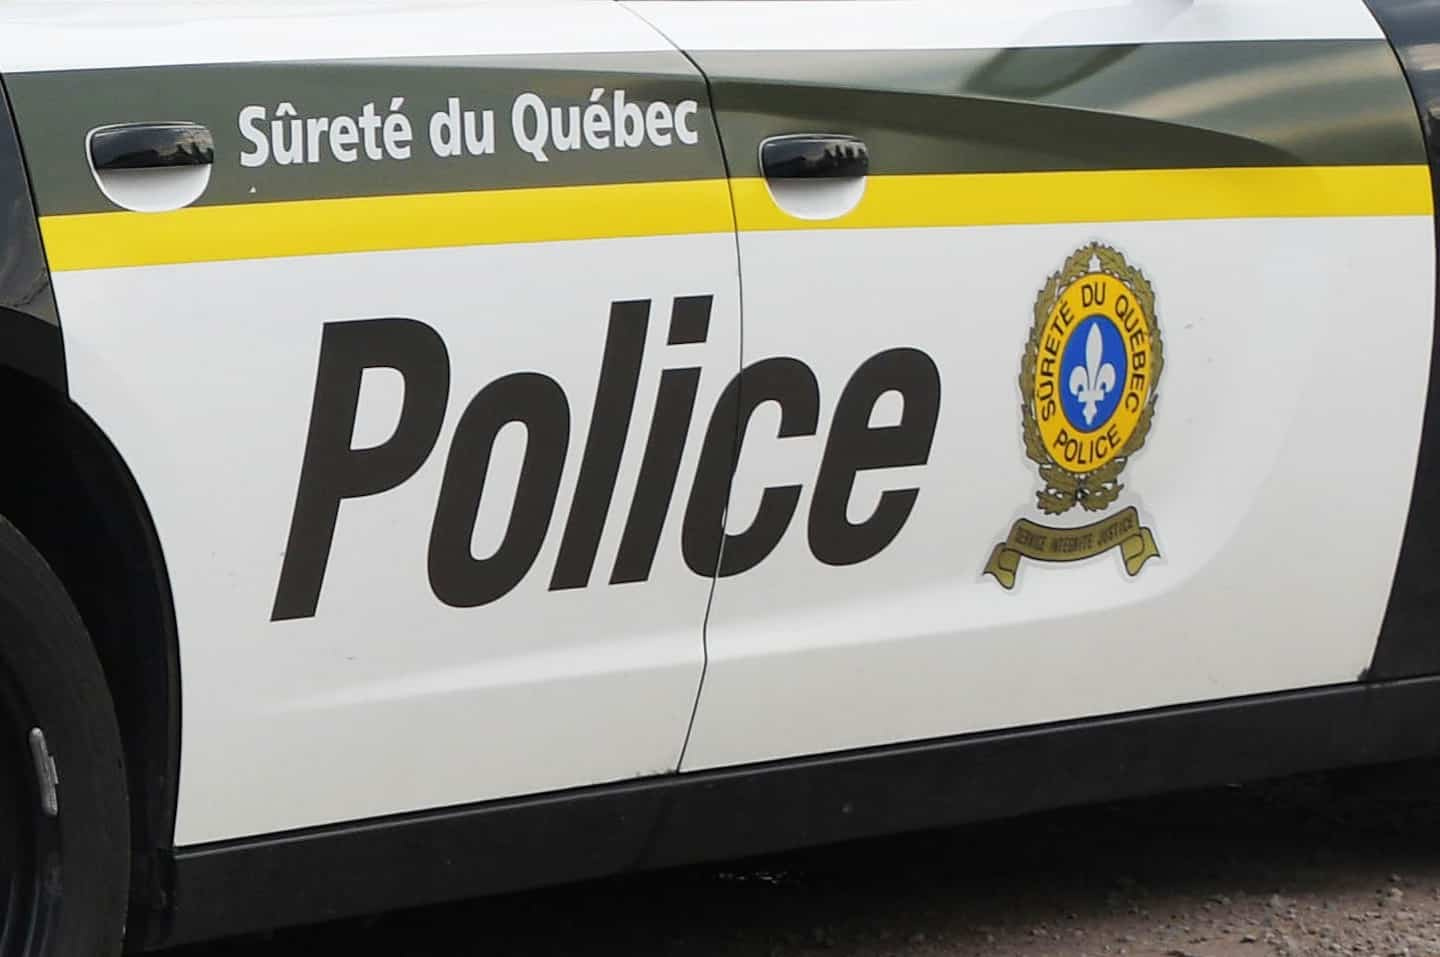 Home invasion: a 31-year-old woman pinned by the Sûreté du Québec